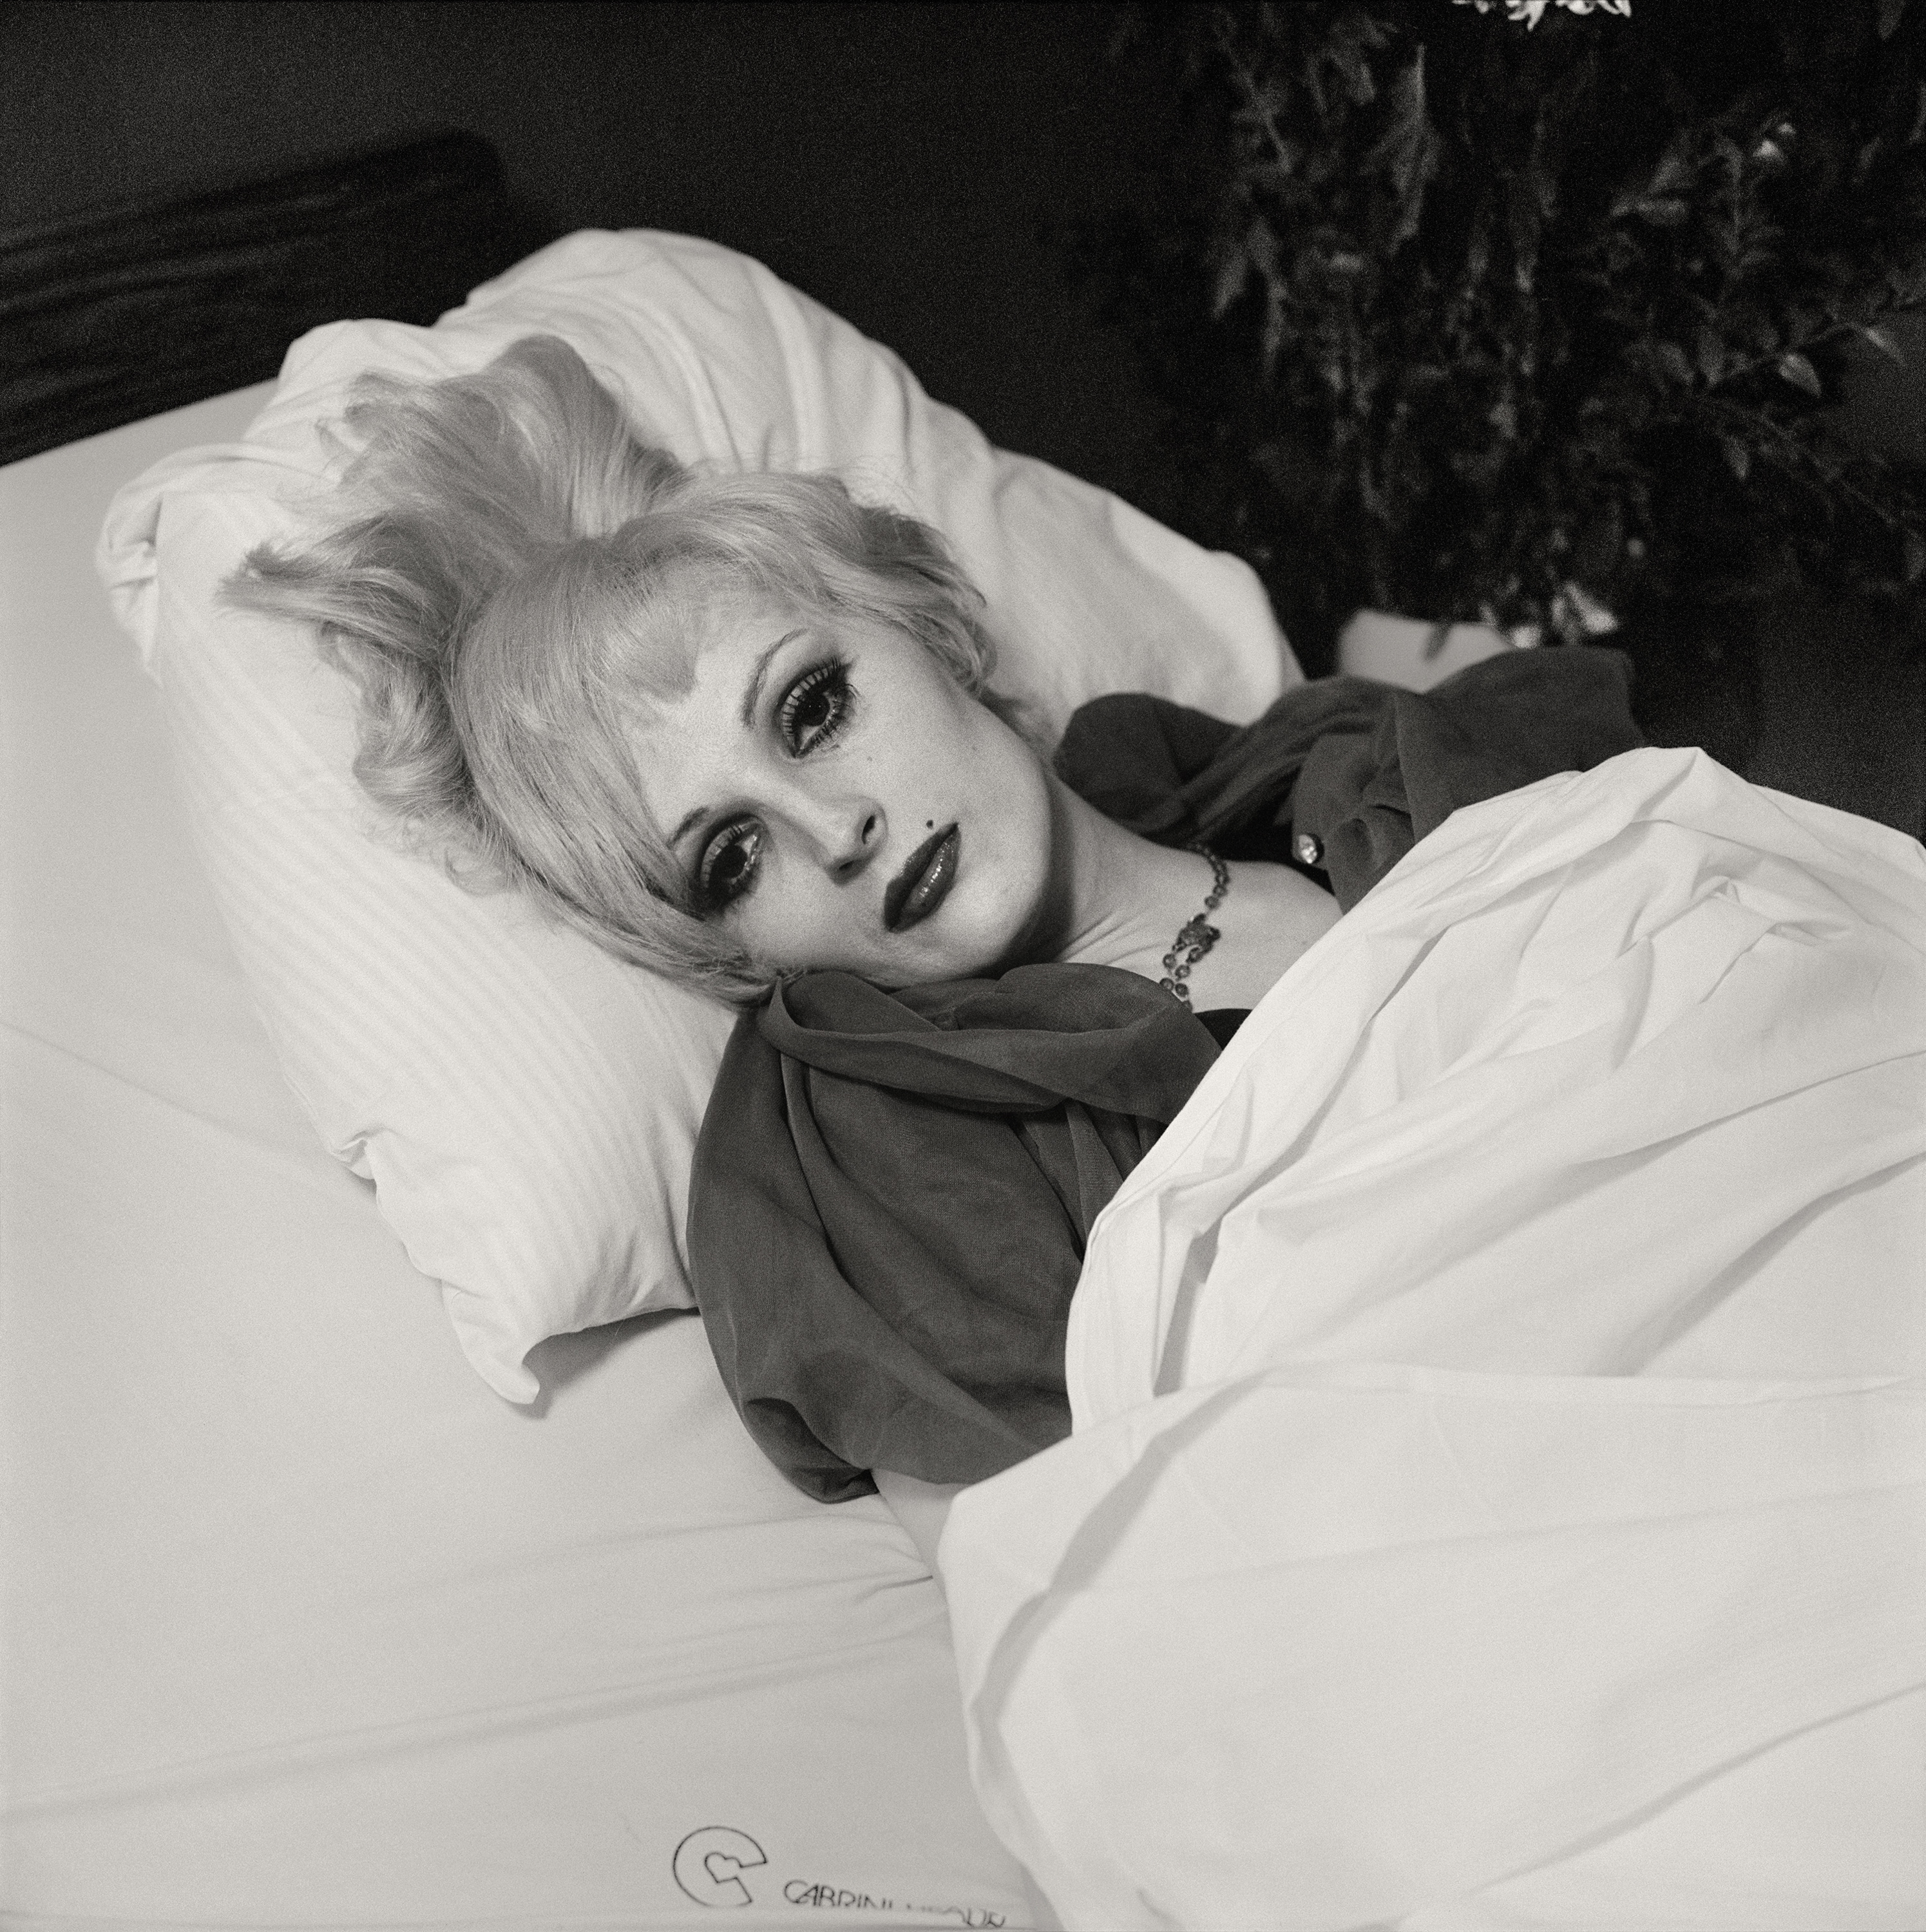 Black and white photograph of a female figure in a hospital bed wearing a full face of makeup and arms at their sides underneath white sheet